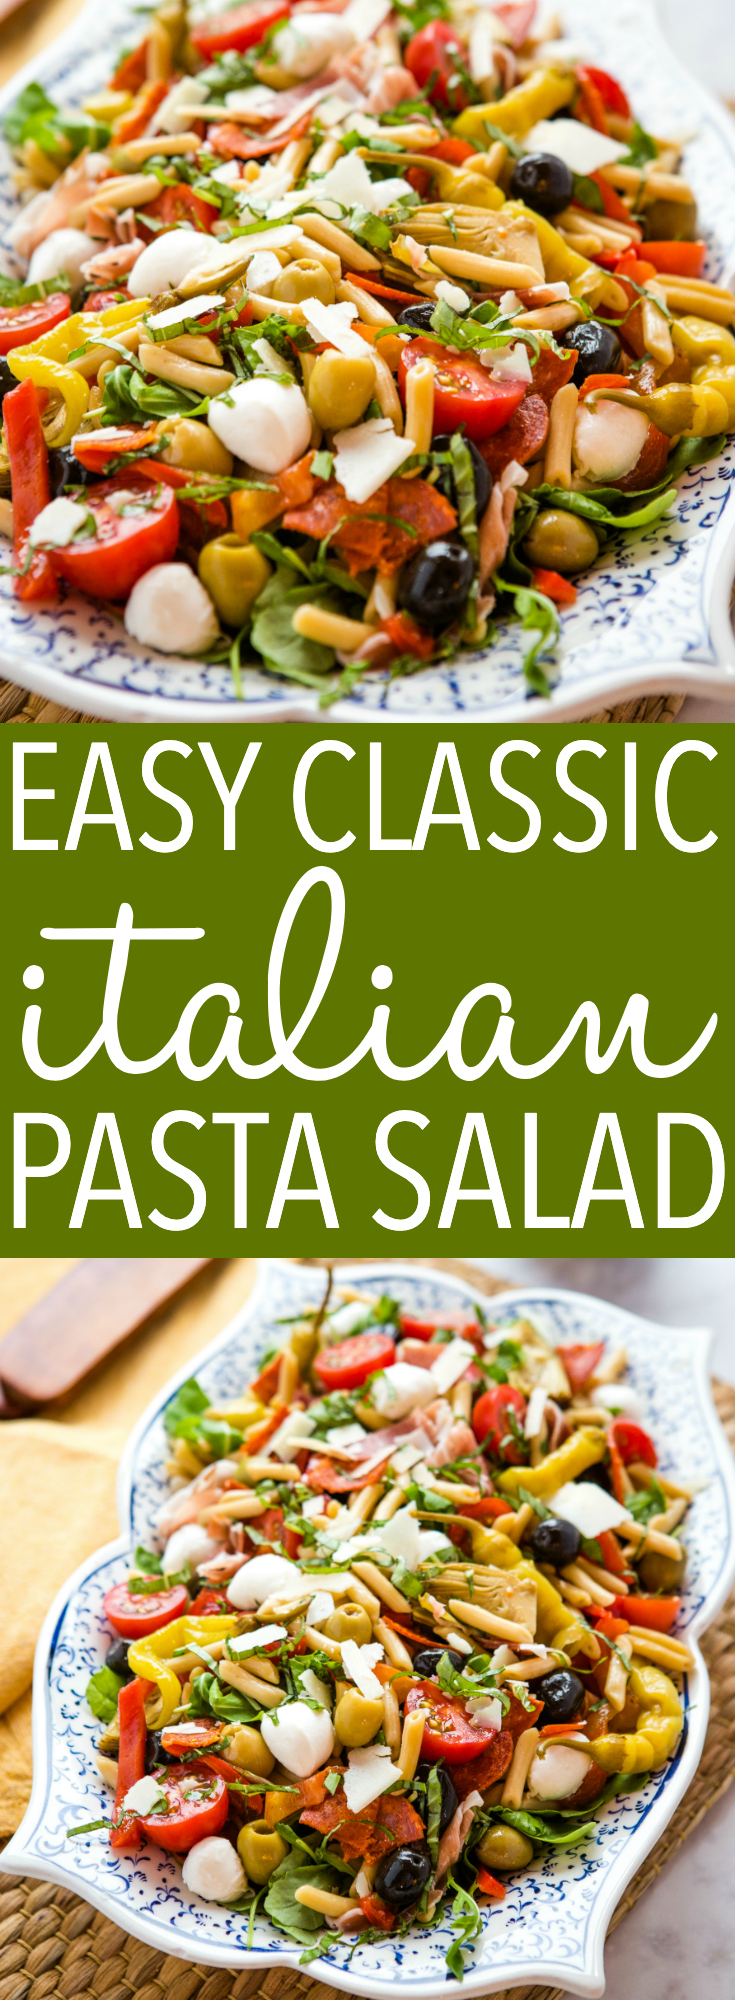 This Easy Classic Italian Pasta Salad is the perfect quick and easy meal idea packed with savoury olives, artichokes, arugula, tomatoes, roasted peppers, mozzarella and parmesan! Recipe from thebusybaker.ca! #italian #pastasalad #classic #recipe #mealidea #dinner #lunch #pasta #mozzarella #olives #italy via @busybakerblog